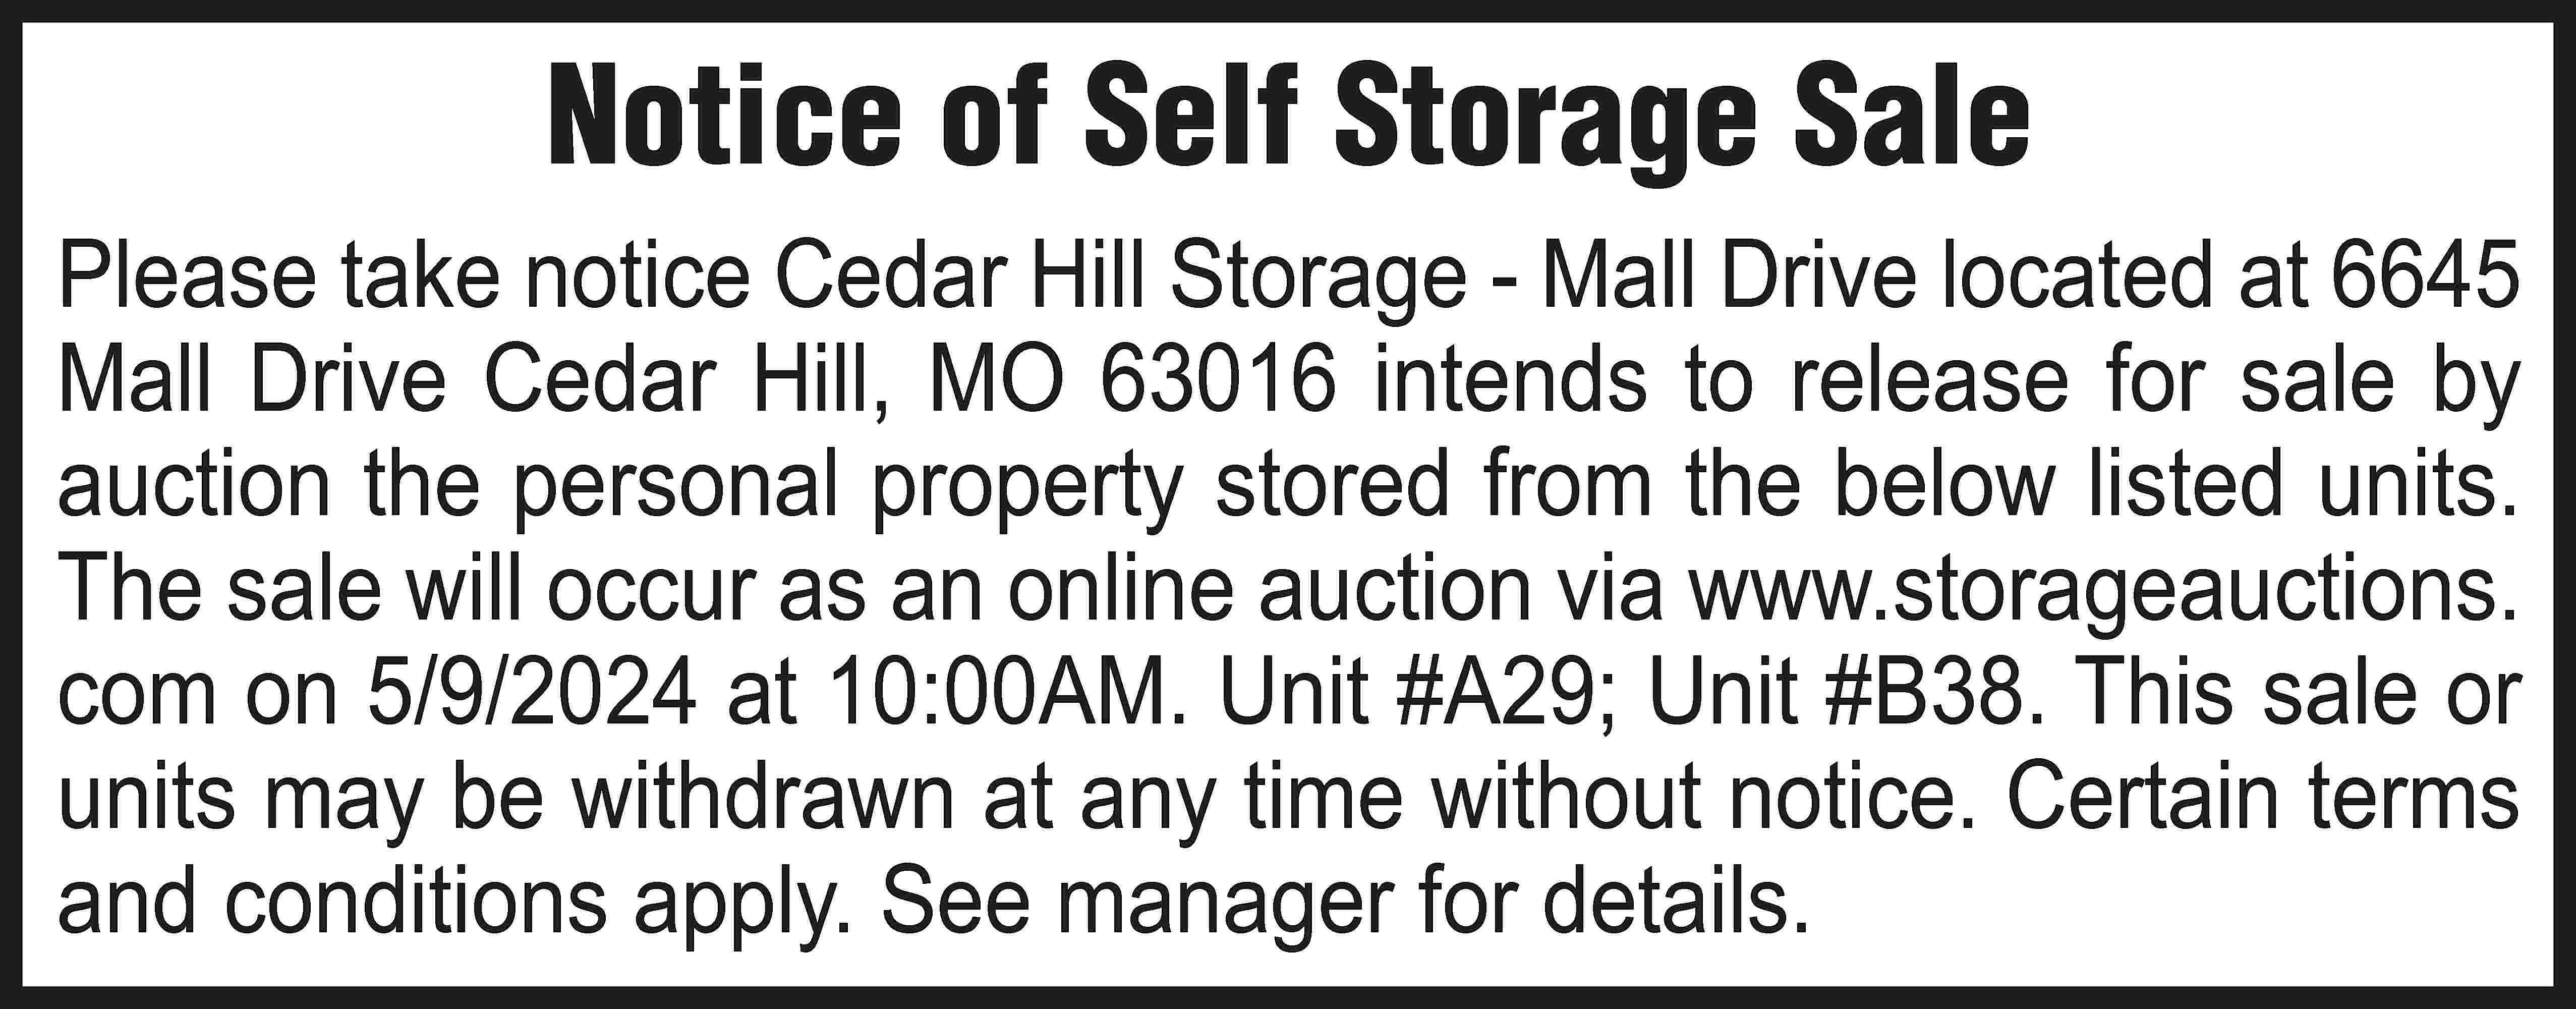 Notice of Self Storage Sale  Notice of Self Storage Sale Please take notice Cedar Hill Storage - Mall Drive located at 6645 Mall Drive Cedar Hill, MO 63016 intends to release for sale by auction the personal property stored from the below listed units. The sale will occur as an online auction via www.storageauctions. com on 5/9/2024 at 10:00AM. Unit #A29; Unit #B38. This sale or units may be withdrawn at any time without notice. Certain terms and conditions apply. See manager for details.